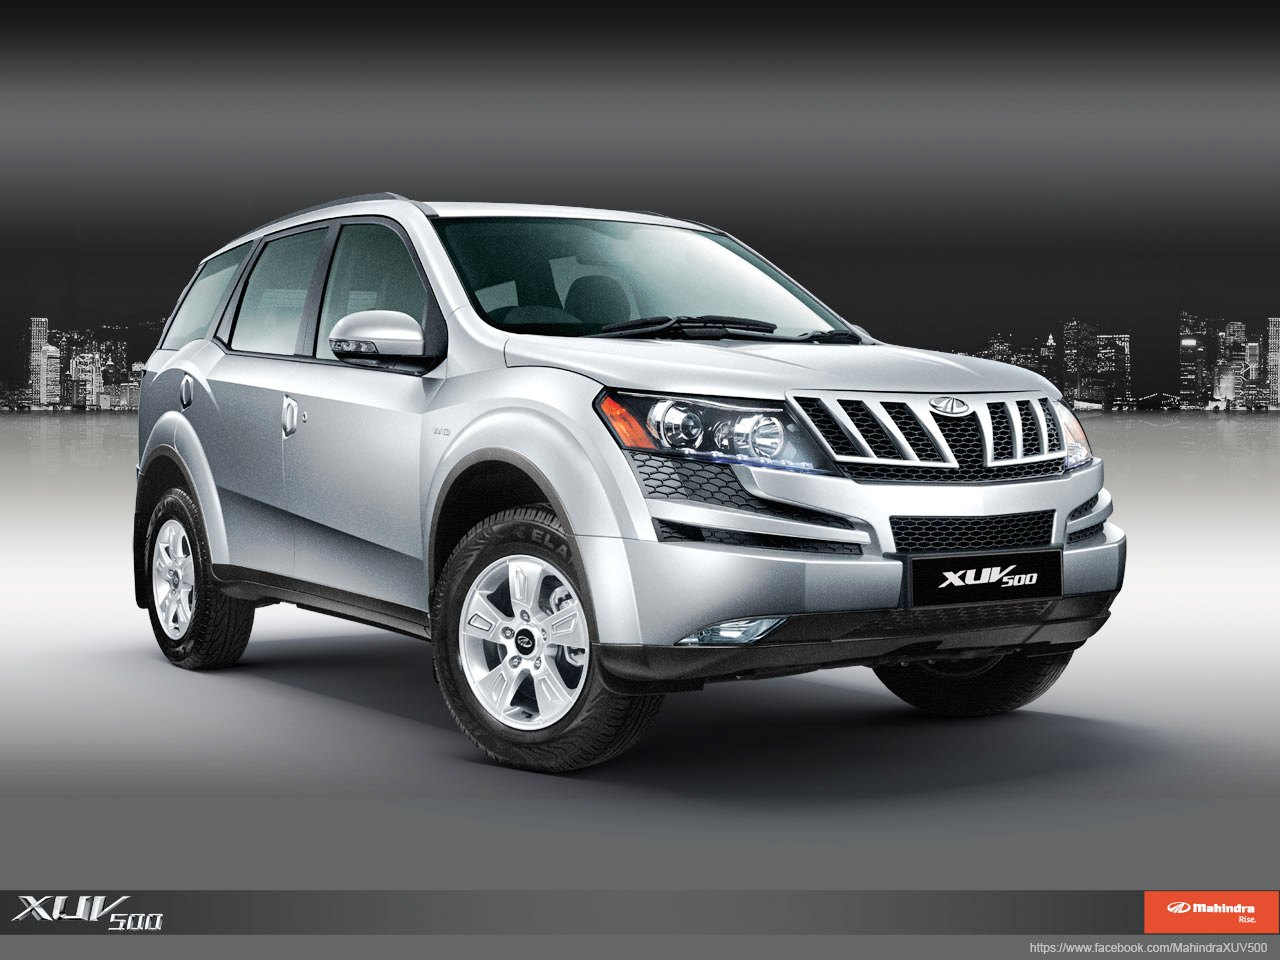 View Full Size - Mahindra Xuv500 Price In Kerala , HD Wallpaper & Backgrounds